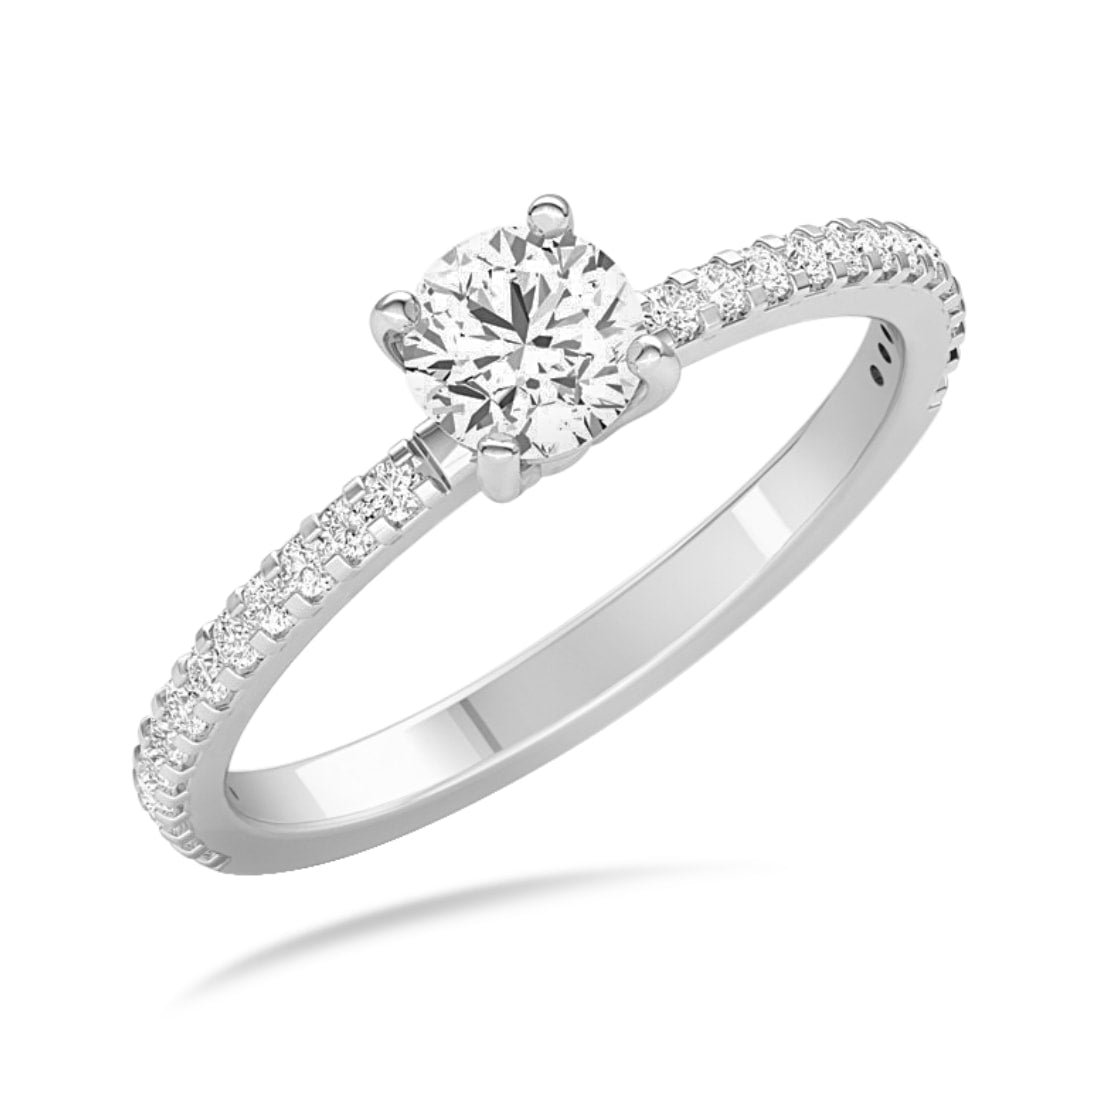 SH Jewellery - Minimalistic 4-Claw solitaire engagement ring  R01-00988B-W0009 (Pictured with 1.05ct diamond.) Perfectly proportioned.  This elegant round brilliant cut diamond engagement ring has a truly  contemporary feel. With its rounded band,